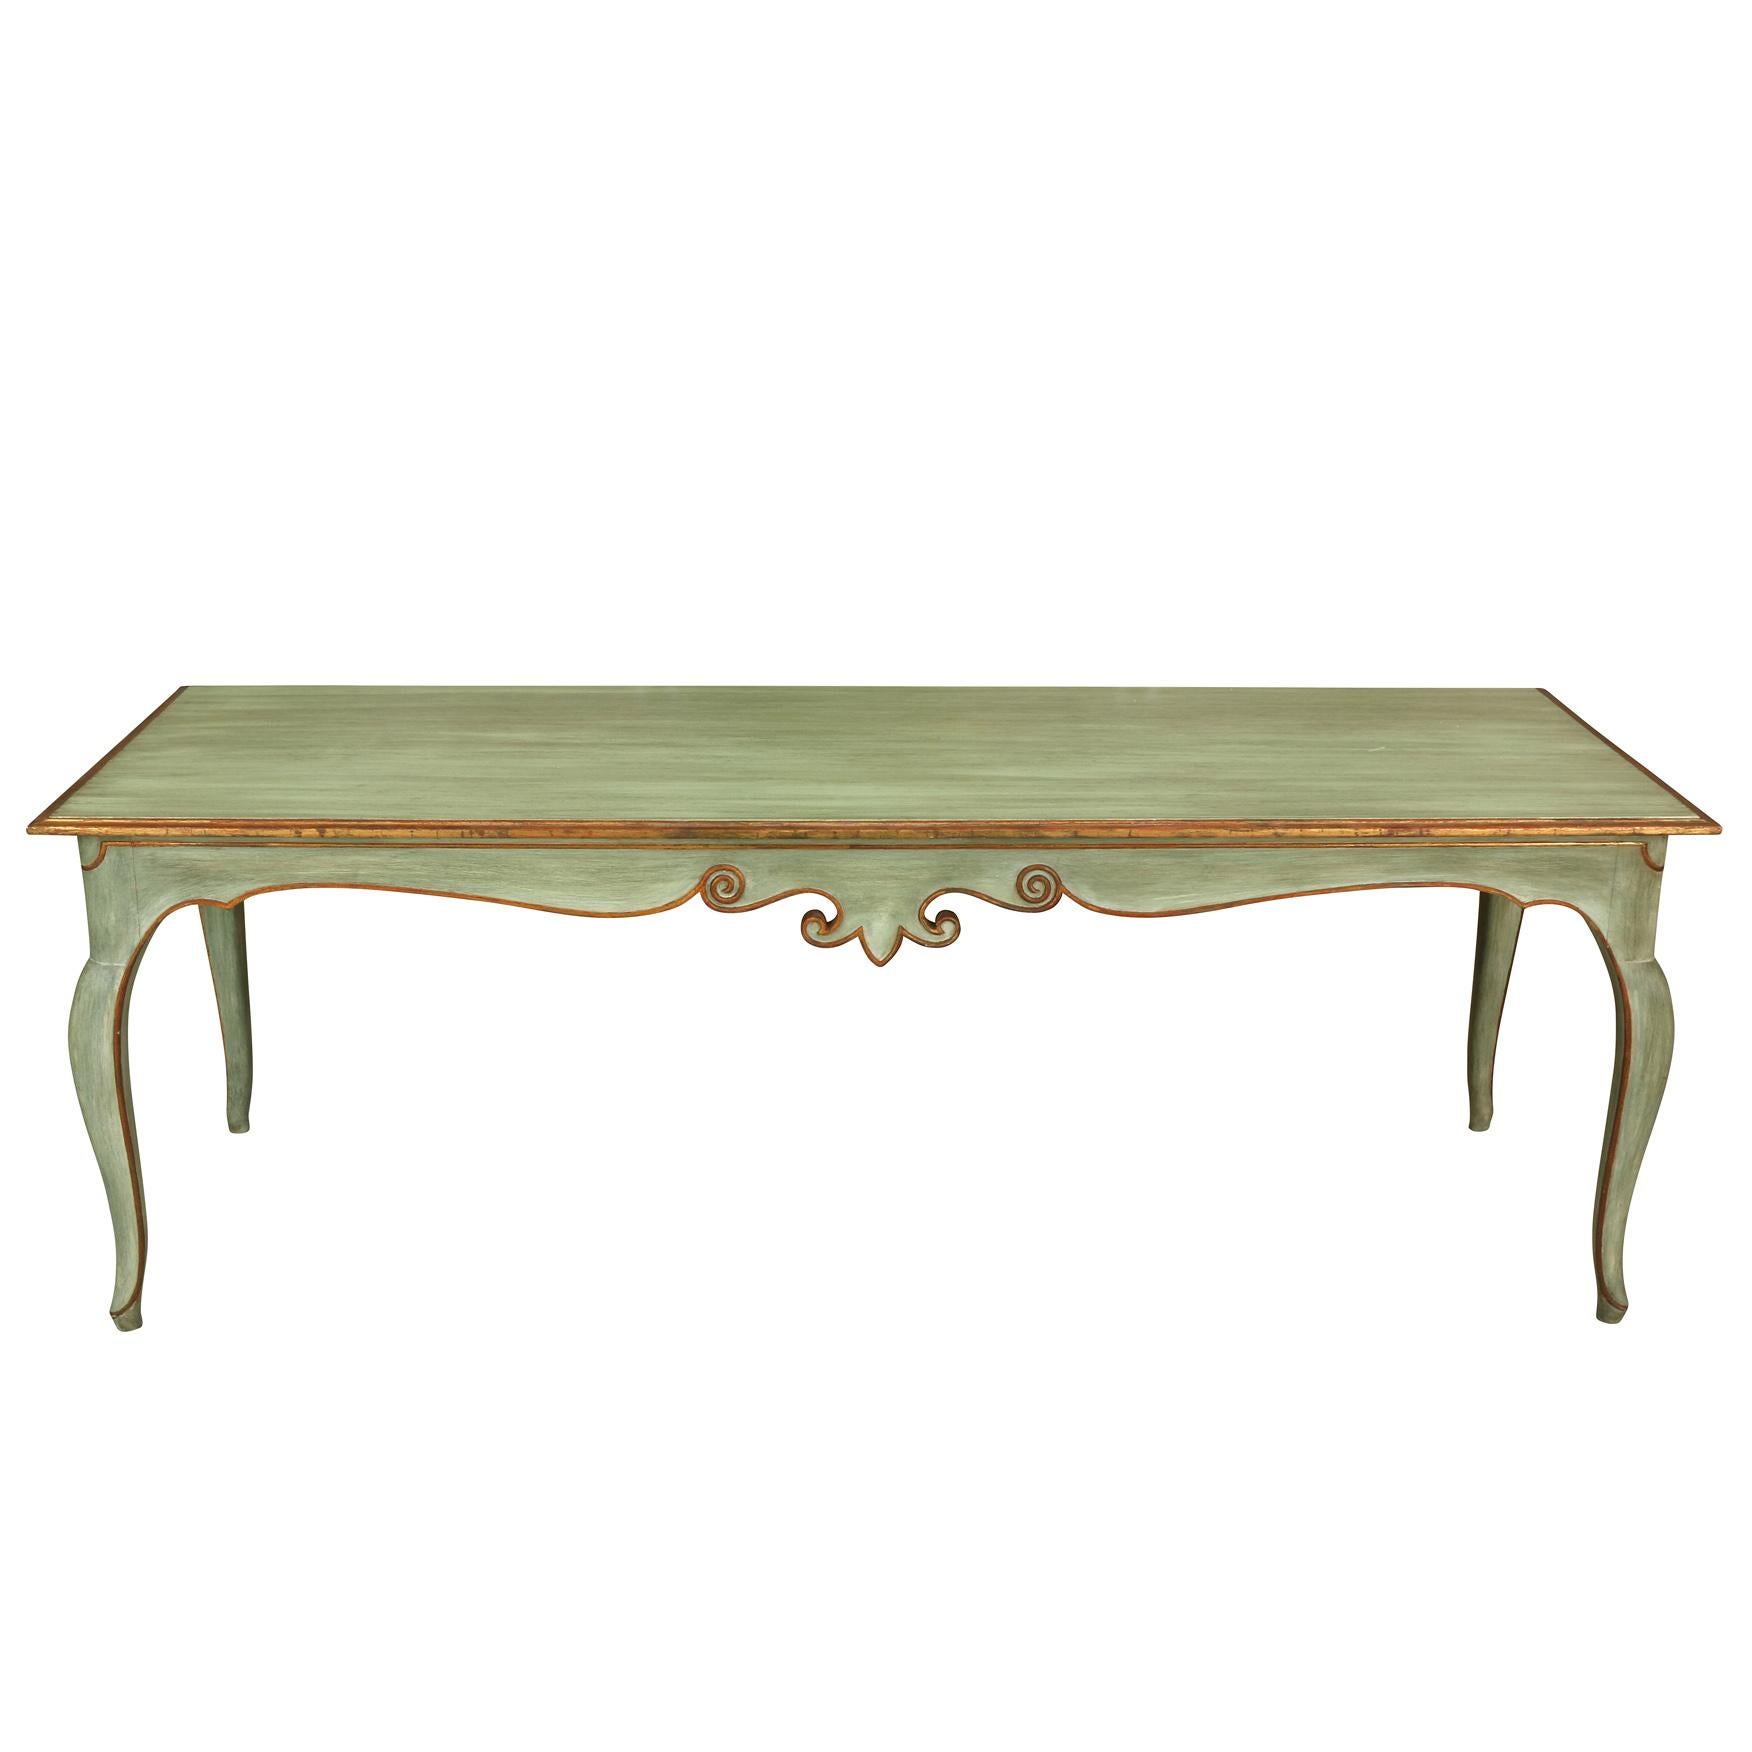 Regency European Style Green and Gilt Painted Console/Dining Table With Cabriole Legs For Sale